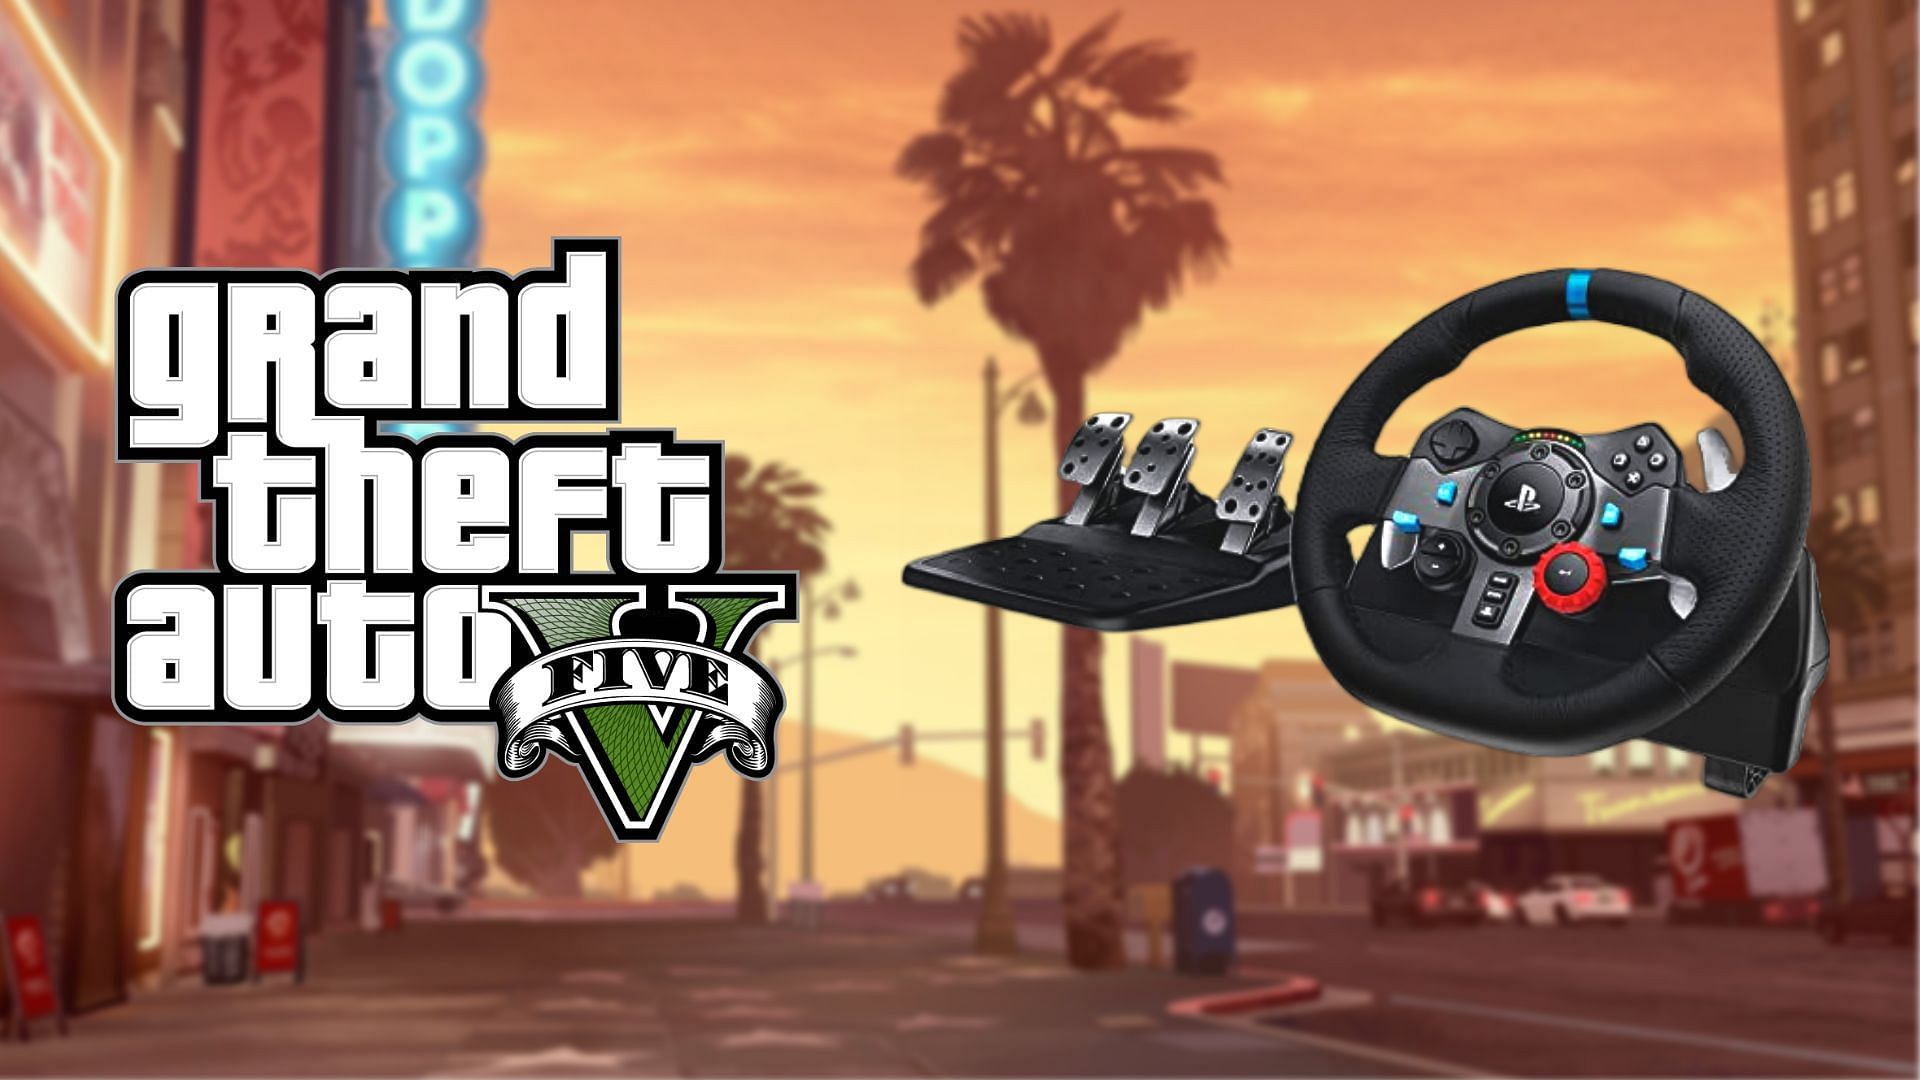 I Installed a GTA 5 Mod Menu on Xbox One so YOU Don't Have Too